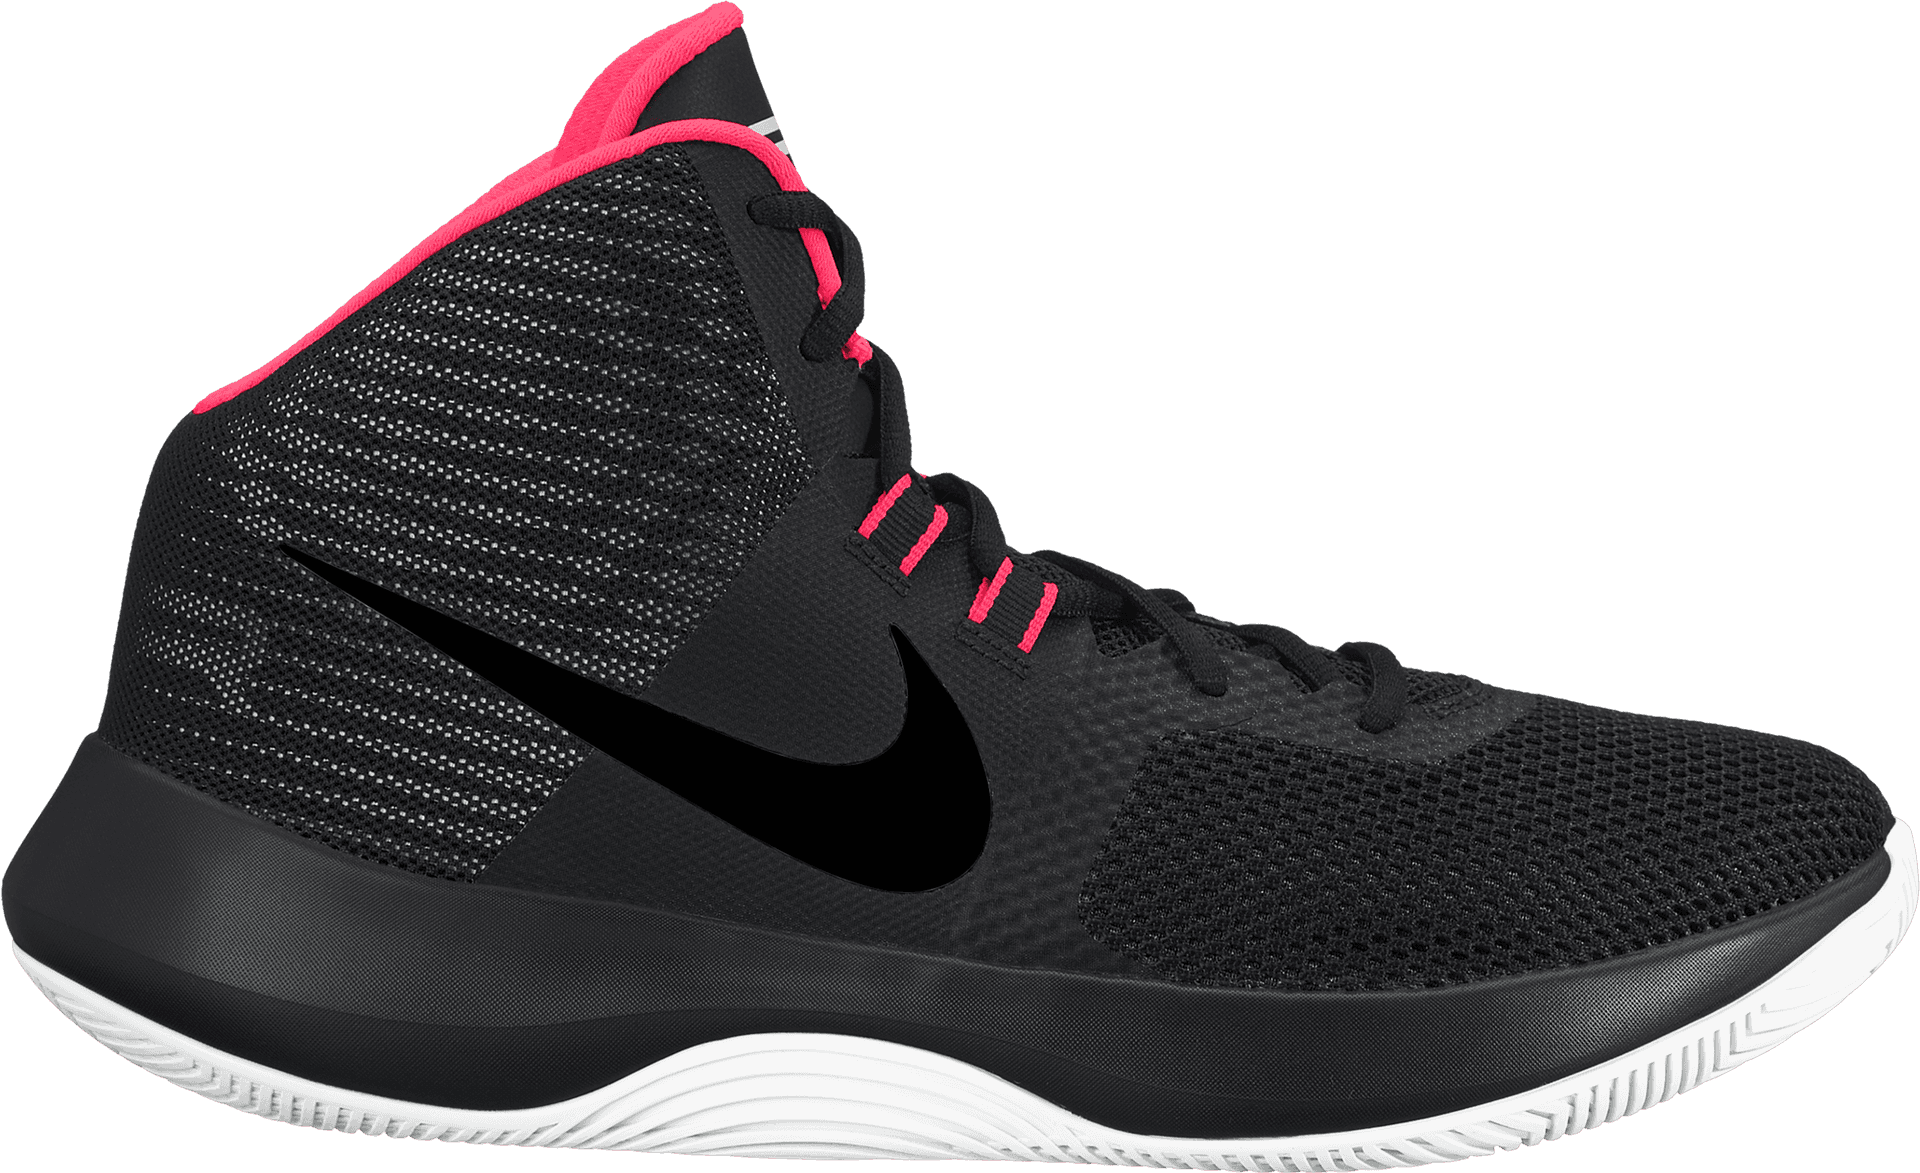 Black Nike Basketball Shoewith Pink Accents PNG